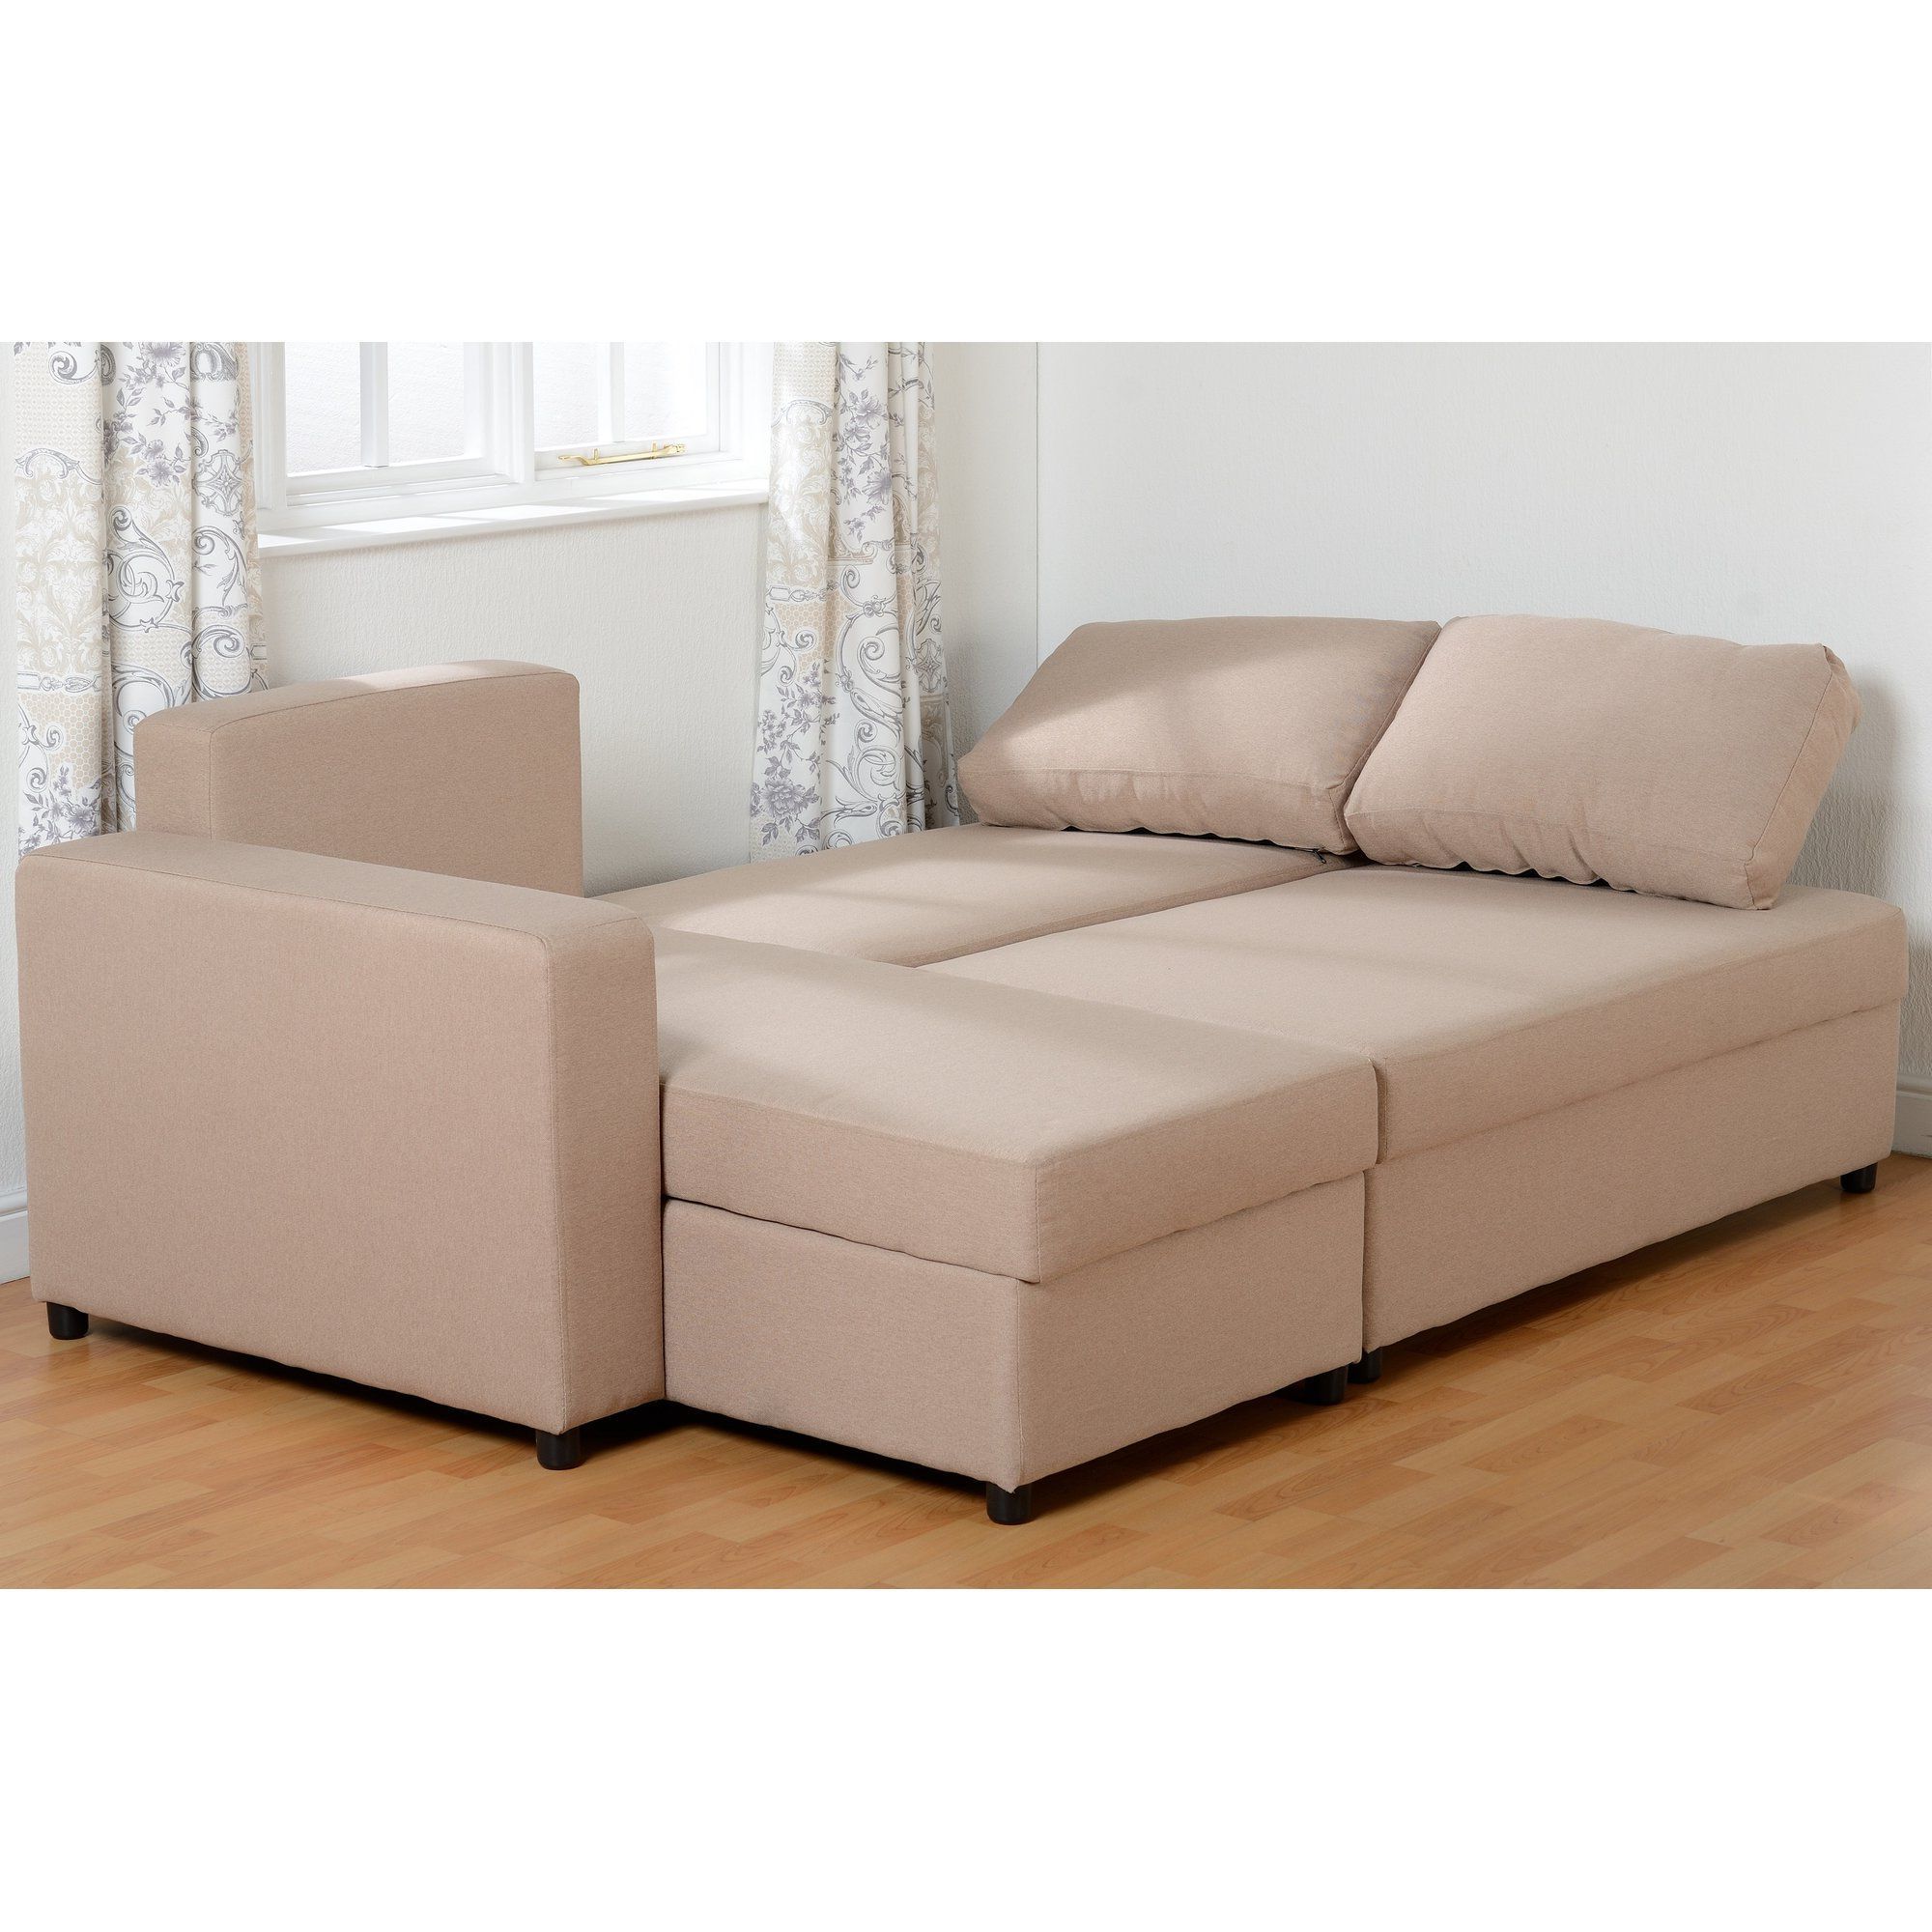 2018 2pc Maddox Right Arm Facing Sectional Sofas With Cuddler Brown With Corner Sofa Sleeper – Wood Chair (View 7 of 17)